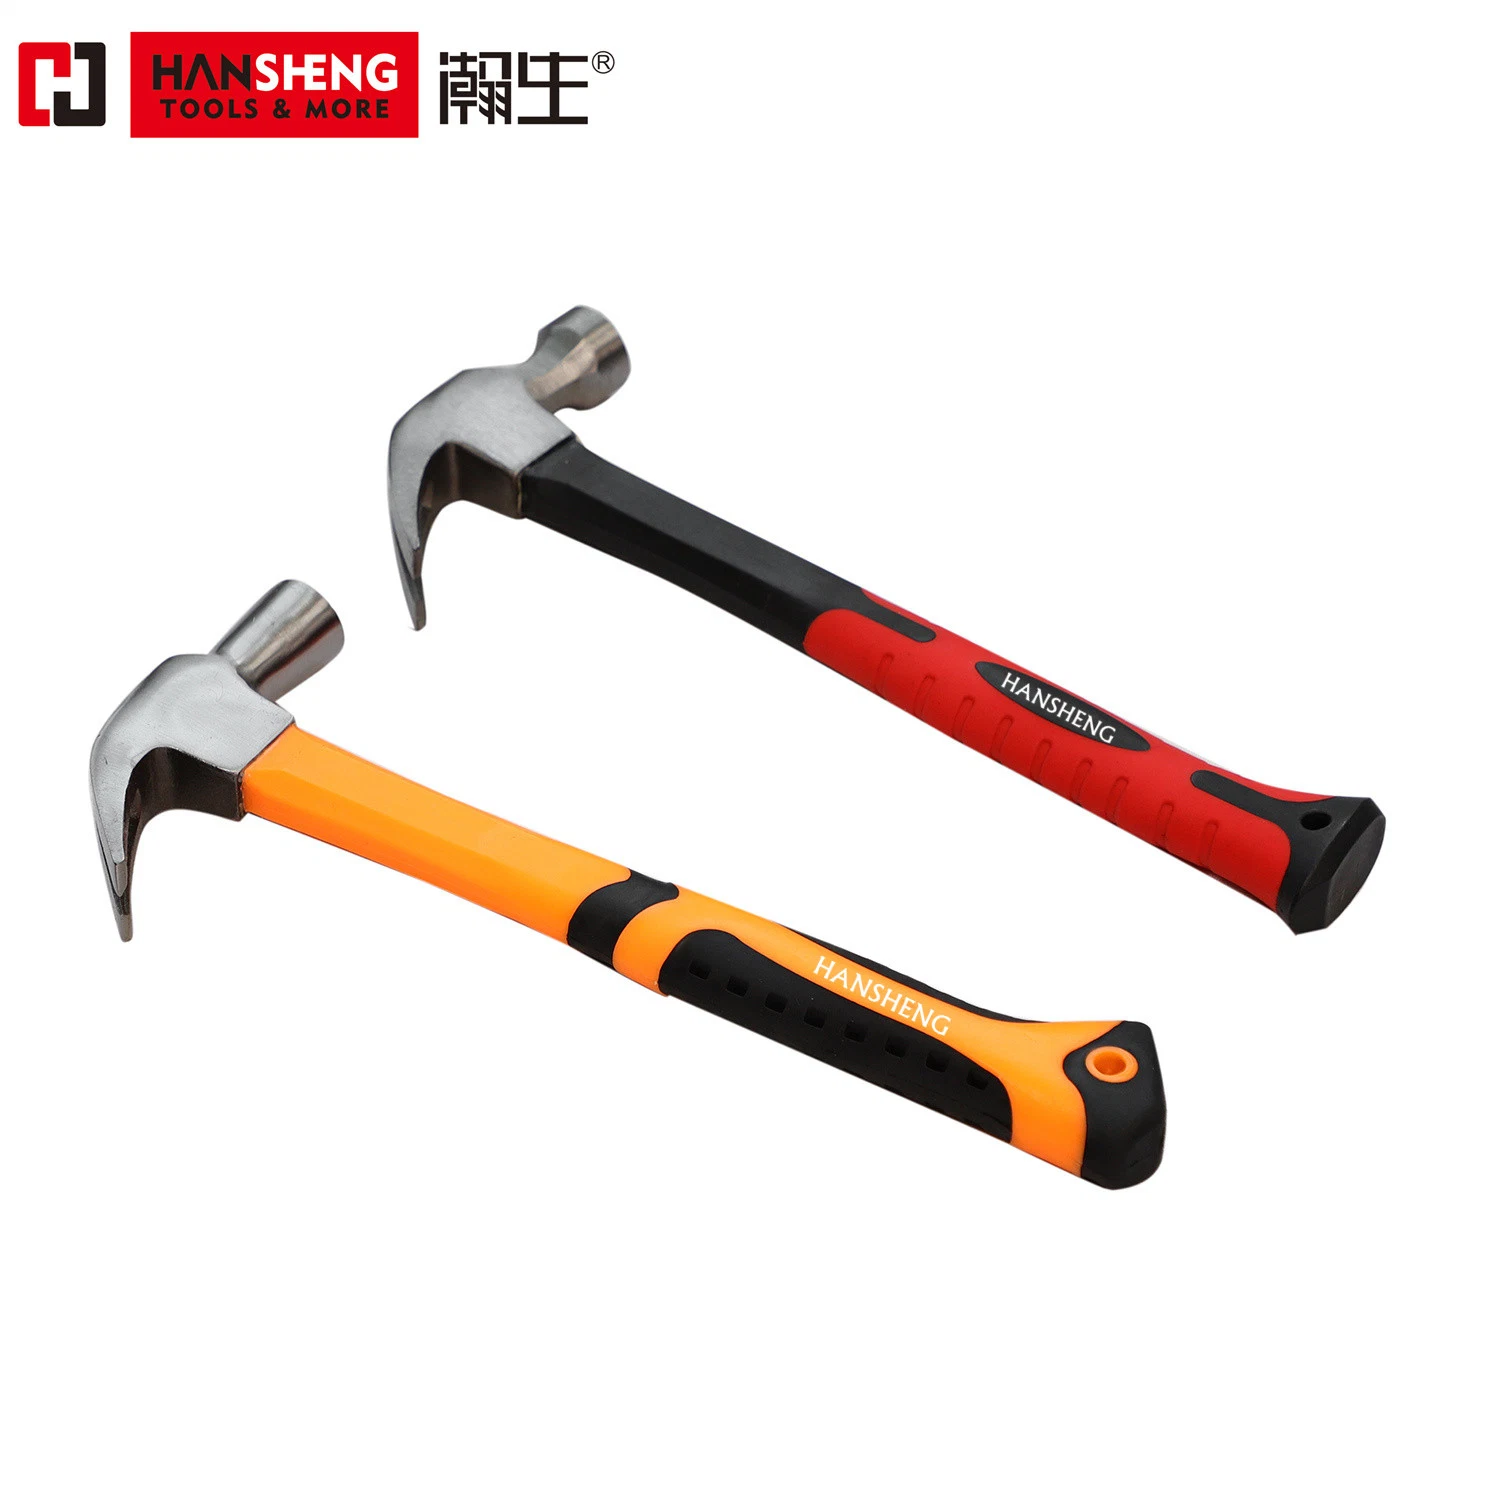 Professional Hammer, Hand Tool, Hardware Tool, Made of Carbon Steel, Wooden Handle, PVC Handle, Glass Fibre Handle, Machinist Hammer, Claw Hammer